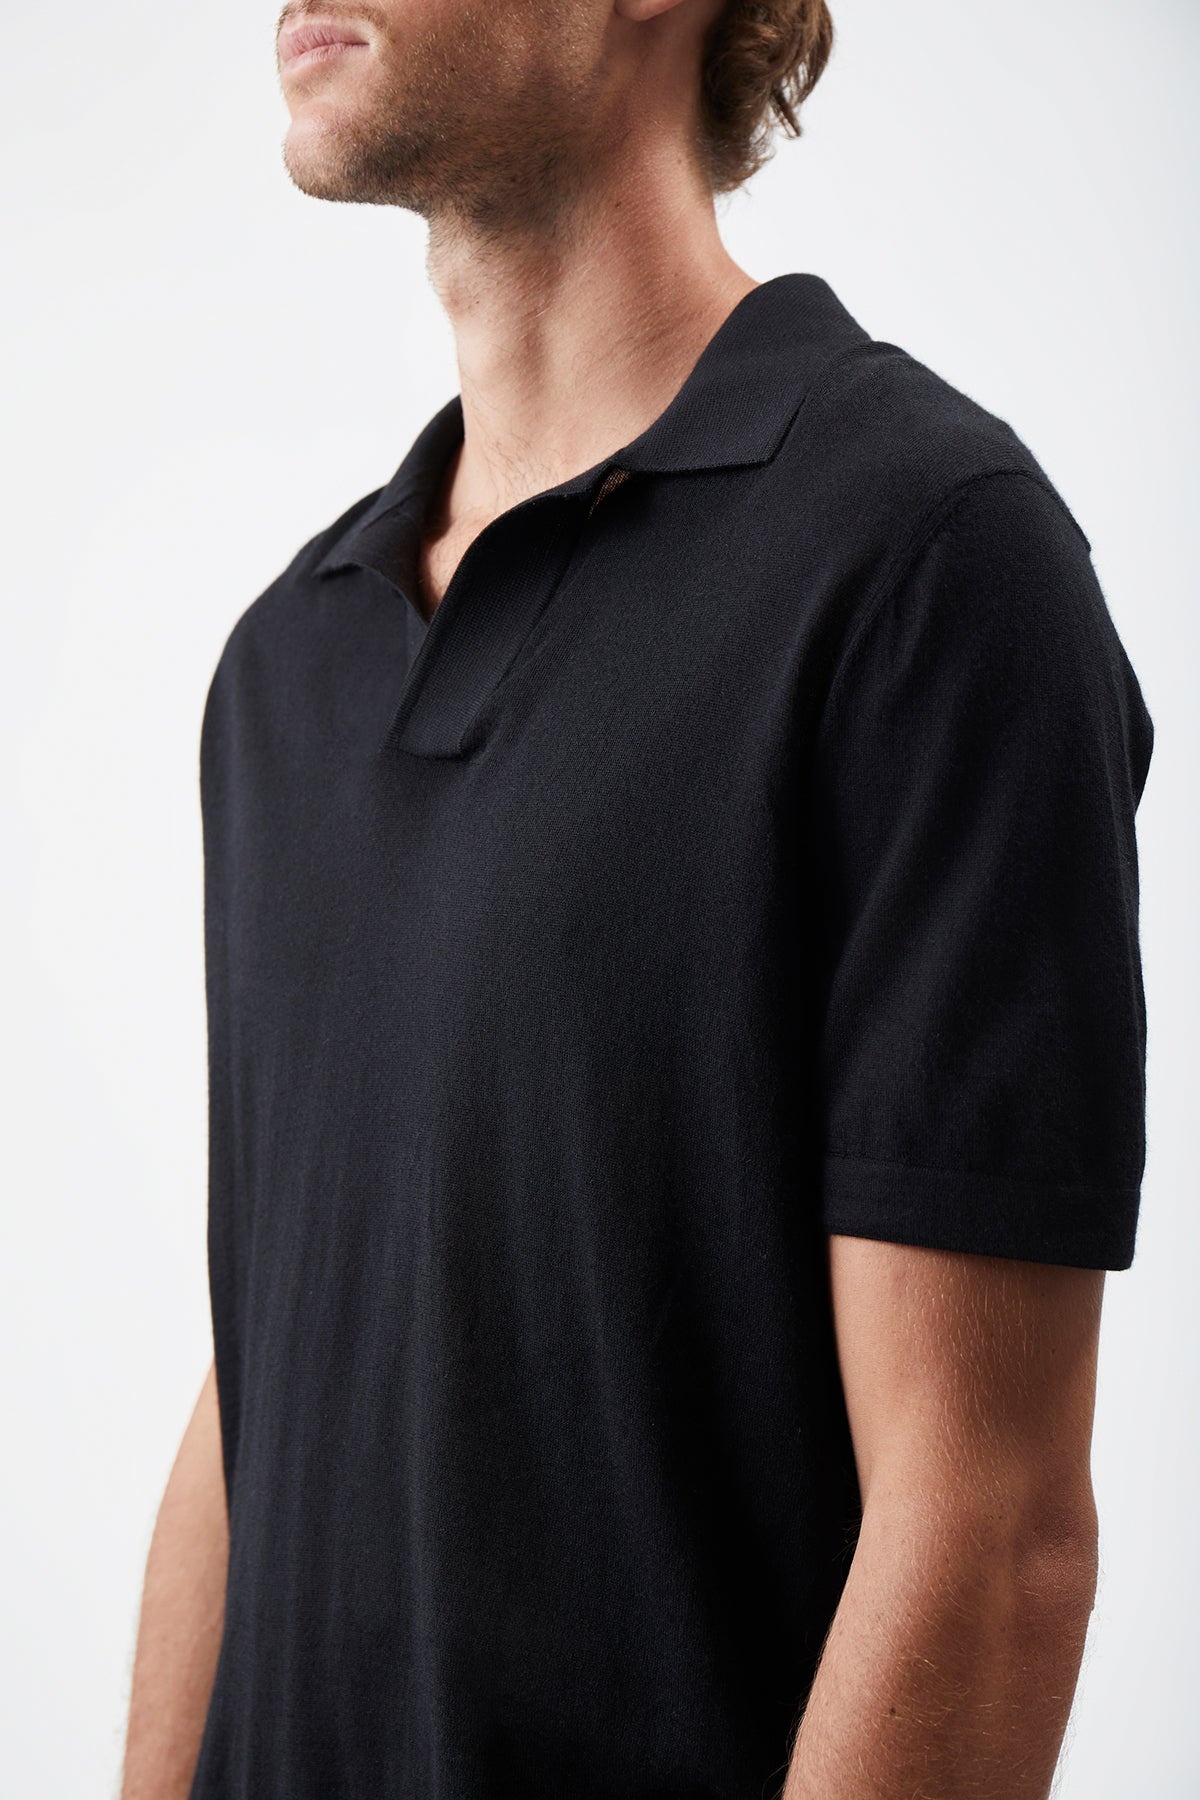 Stendhal Knit Short Sleeve Polo in Black Cashmere - 5